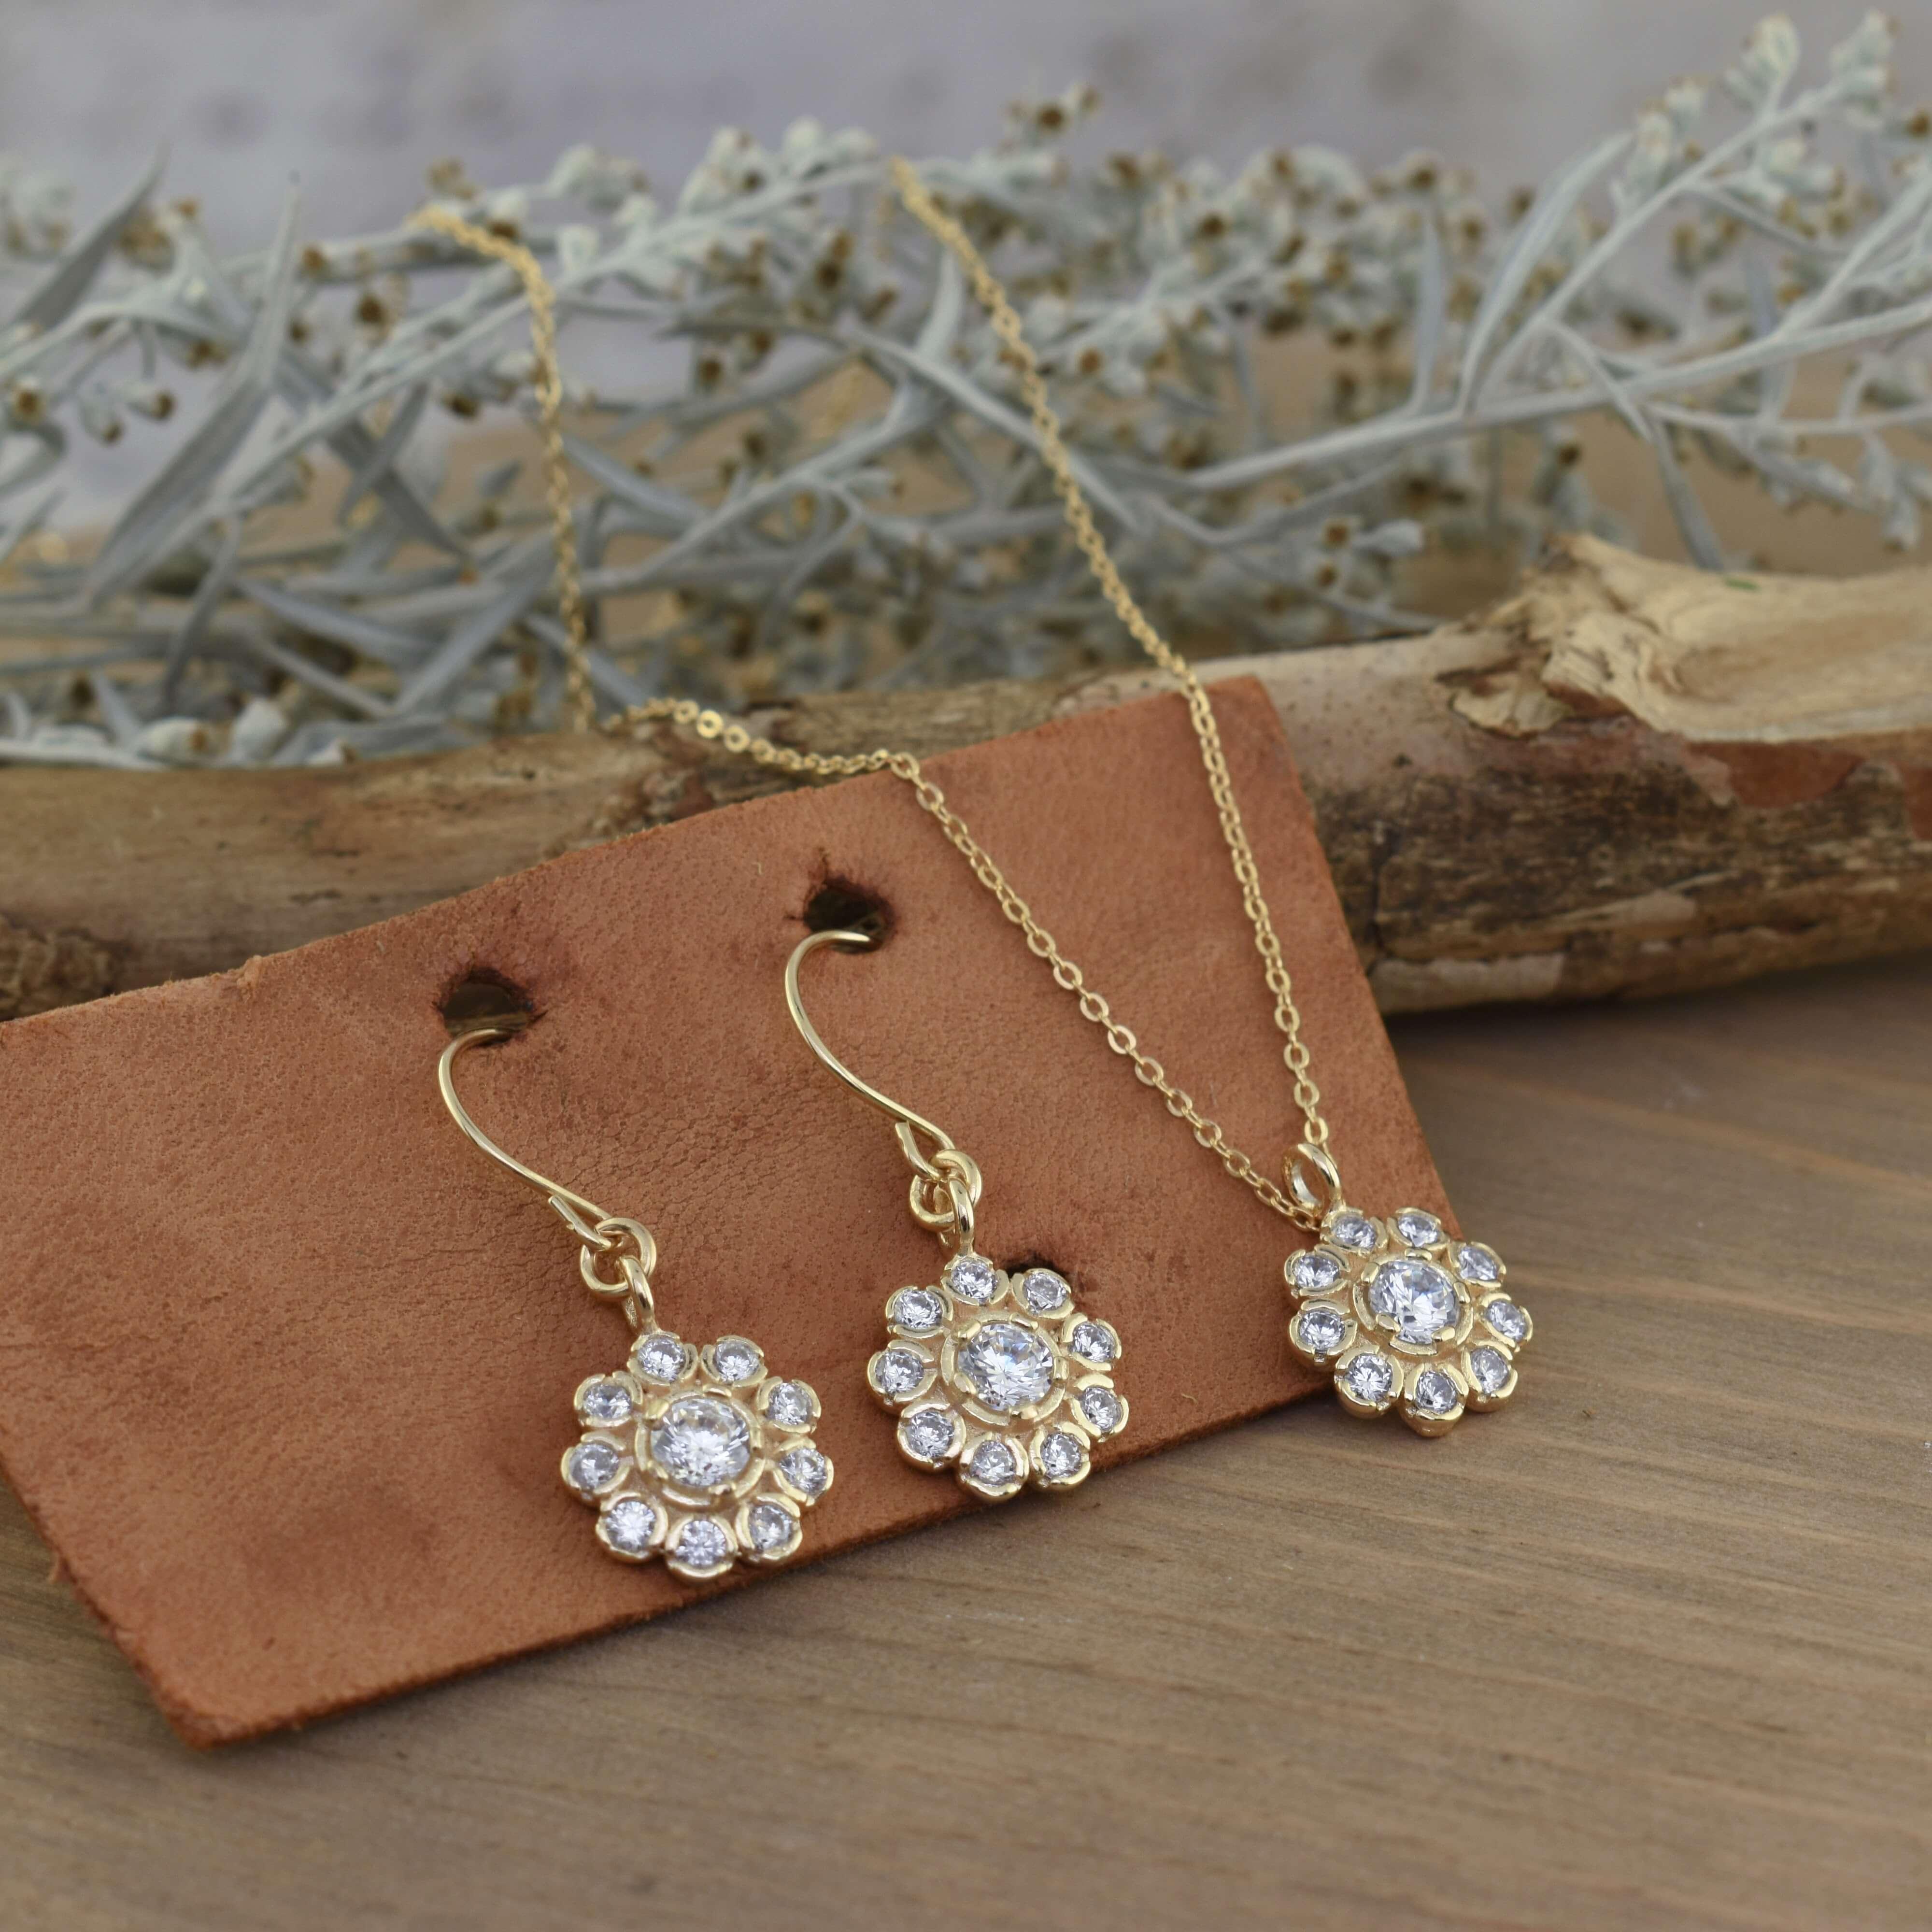 Lit'l Vintage Necklace and Earrings Set in Gold